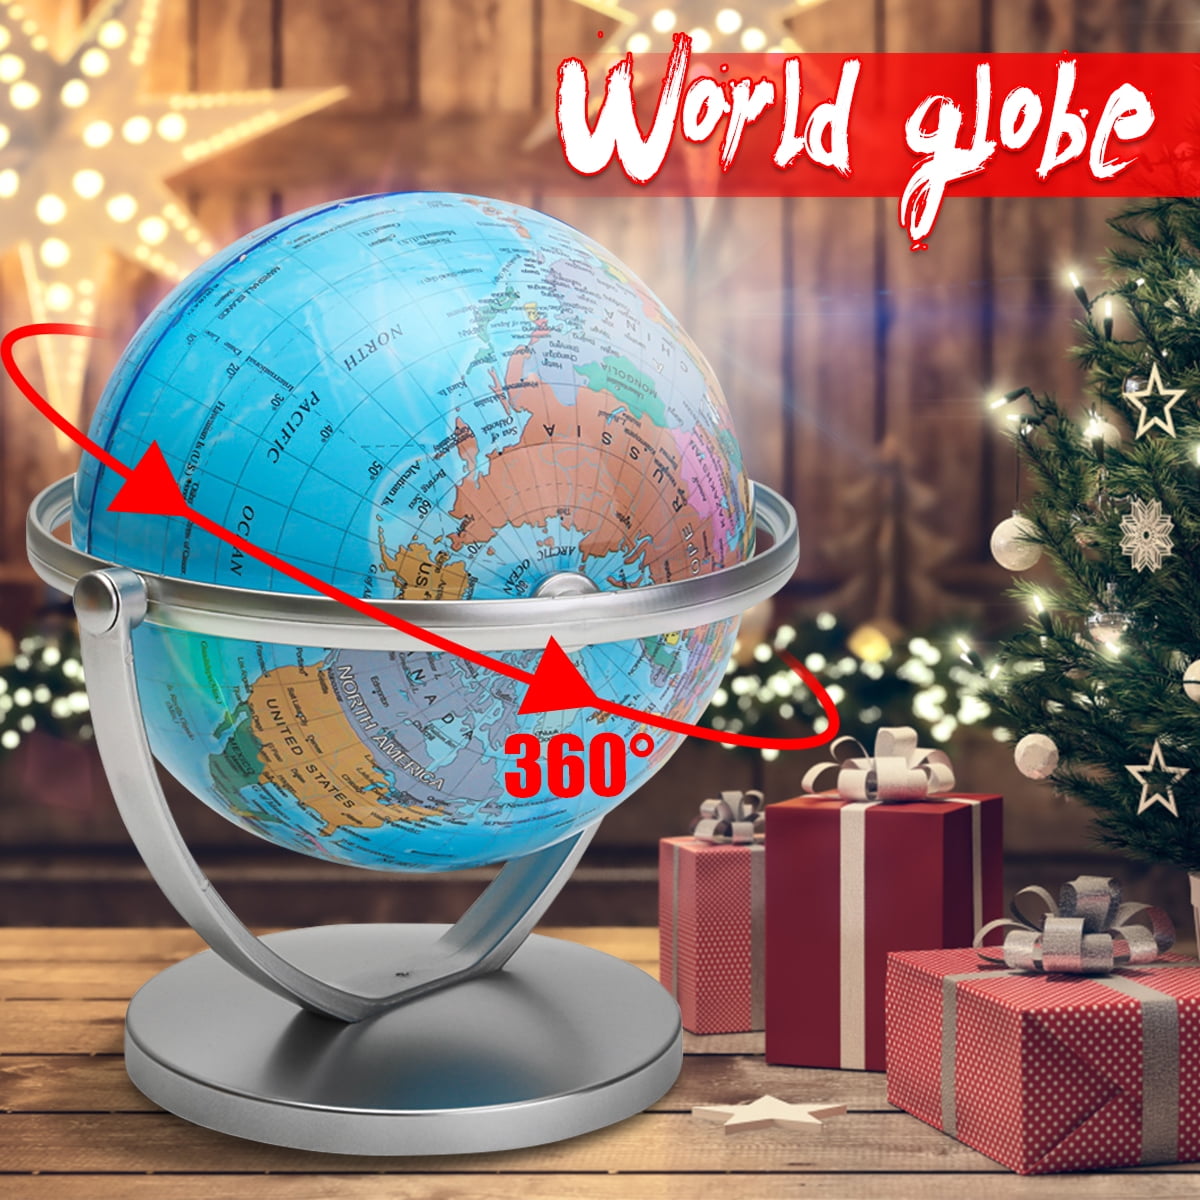 Details about   360 Degree Rotating Globes Earth Ocean Globe World Geography Map Table Desktop 